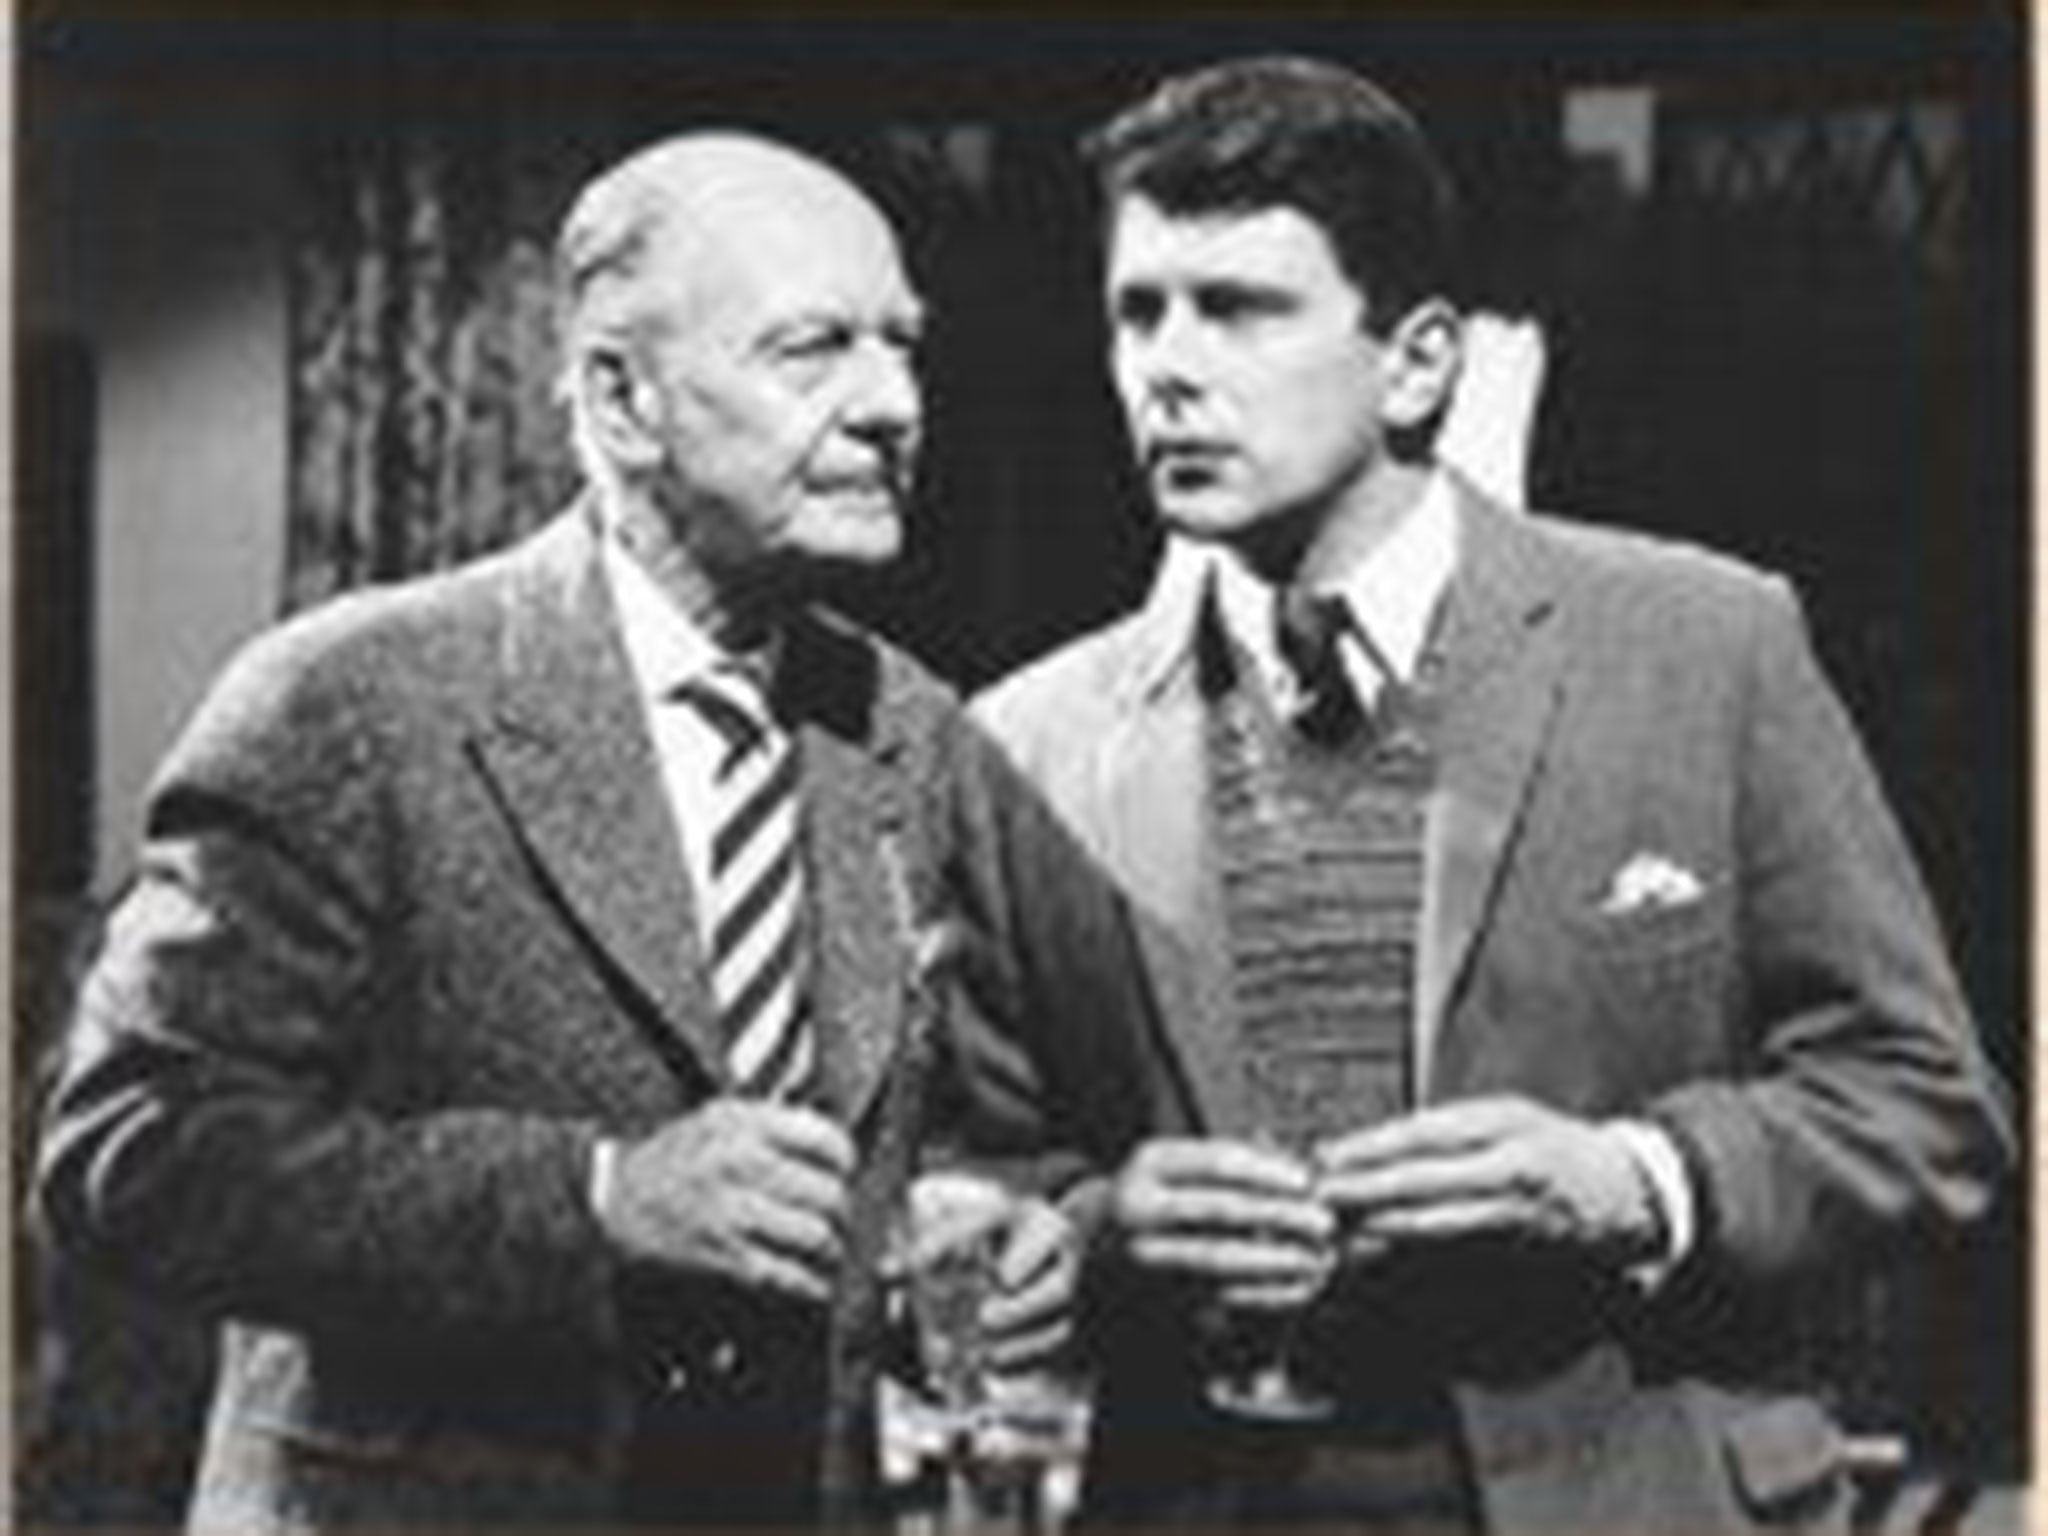 Scoular, right, with Sir John Gielgud in a 1981 TV adaptation of Agatha Christie’s Seven Dials Mystery